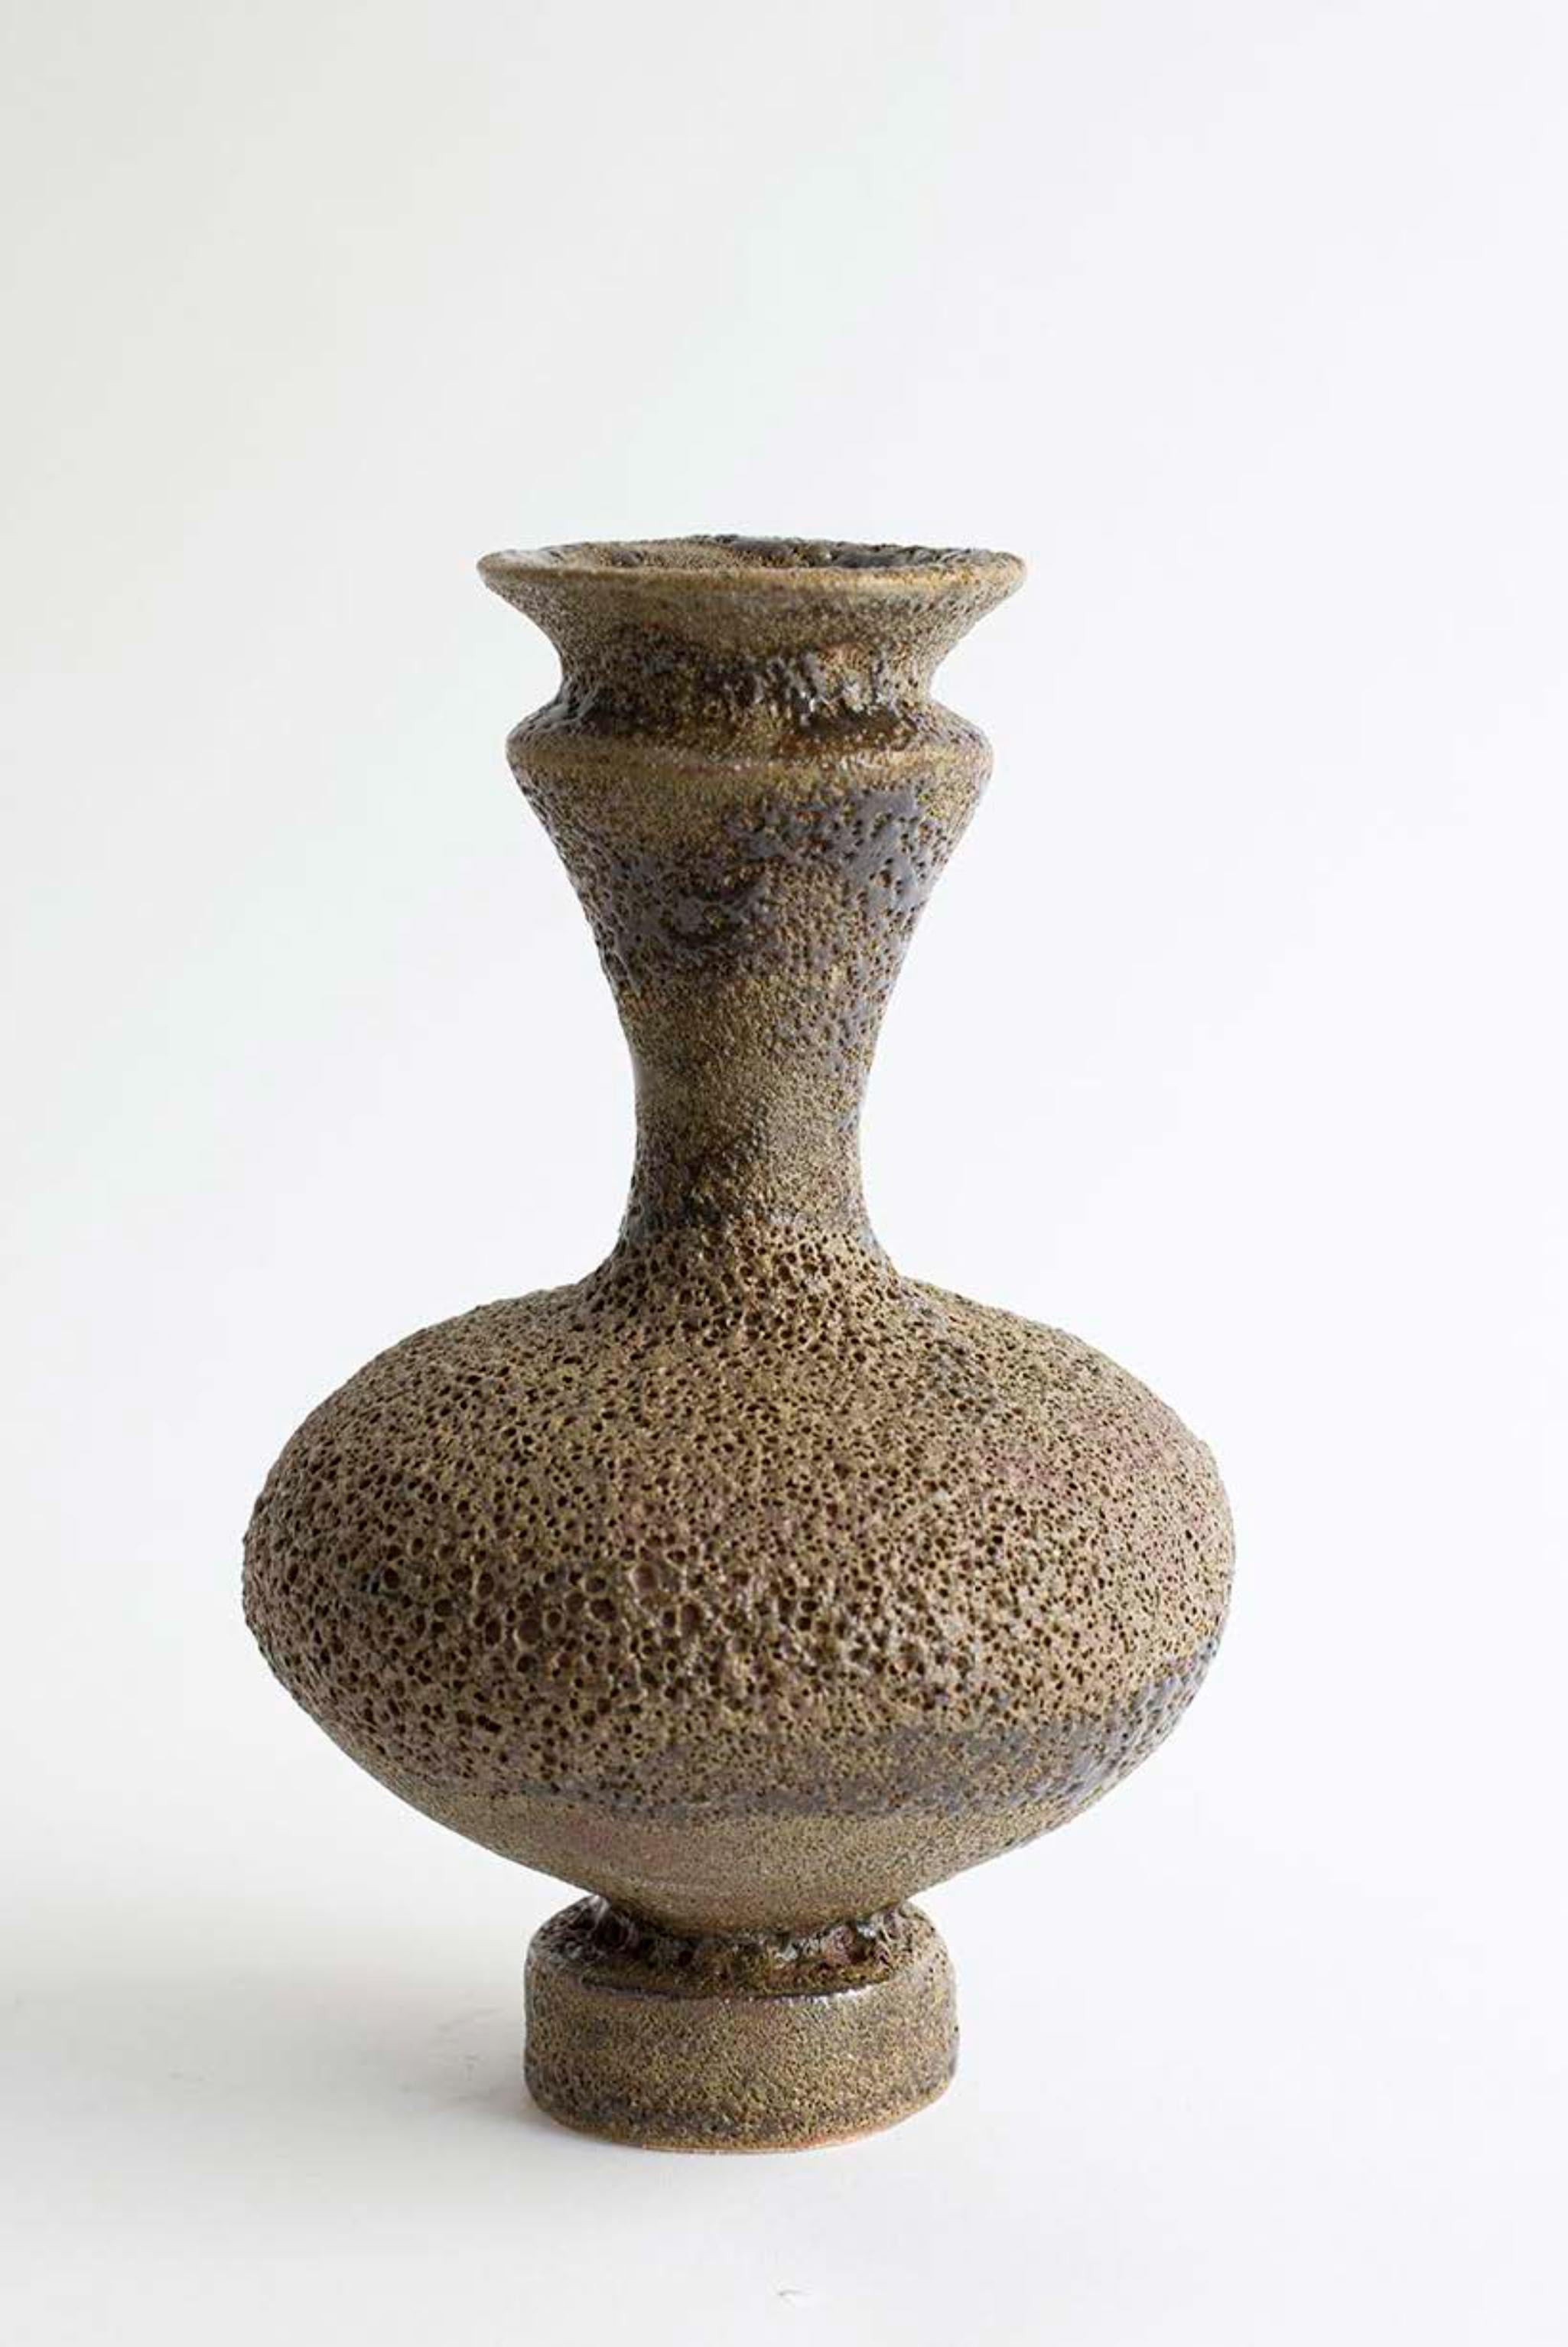 Unique Arq 006 musgo vase by Raquel Vidal and Pedro Paz.
Dimensions: Ø 15 x 23 cm.
Materials: hand-sculpted glazed stoneware.

The Arq series emerged from our own past production. Drawing its inspiration from the field of archaeology, it takes